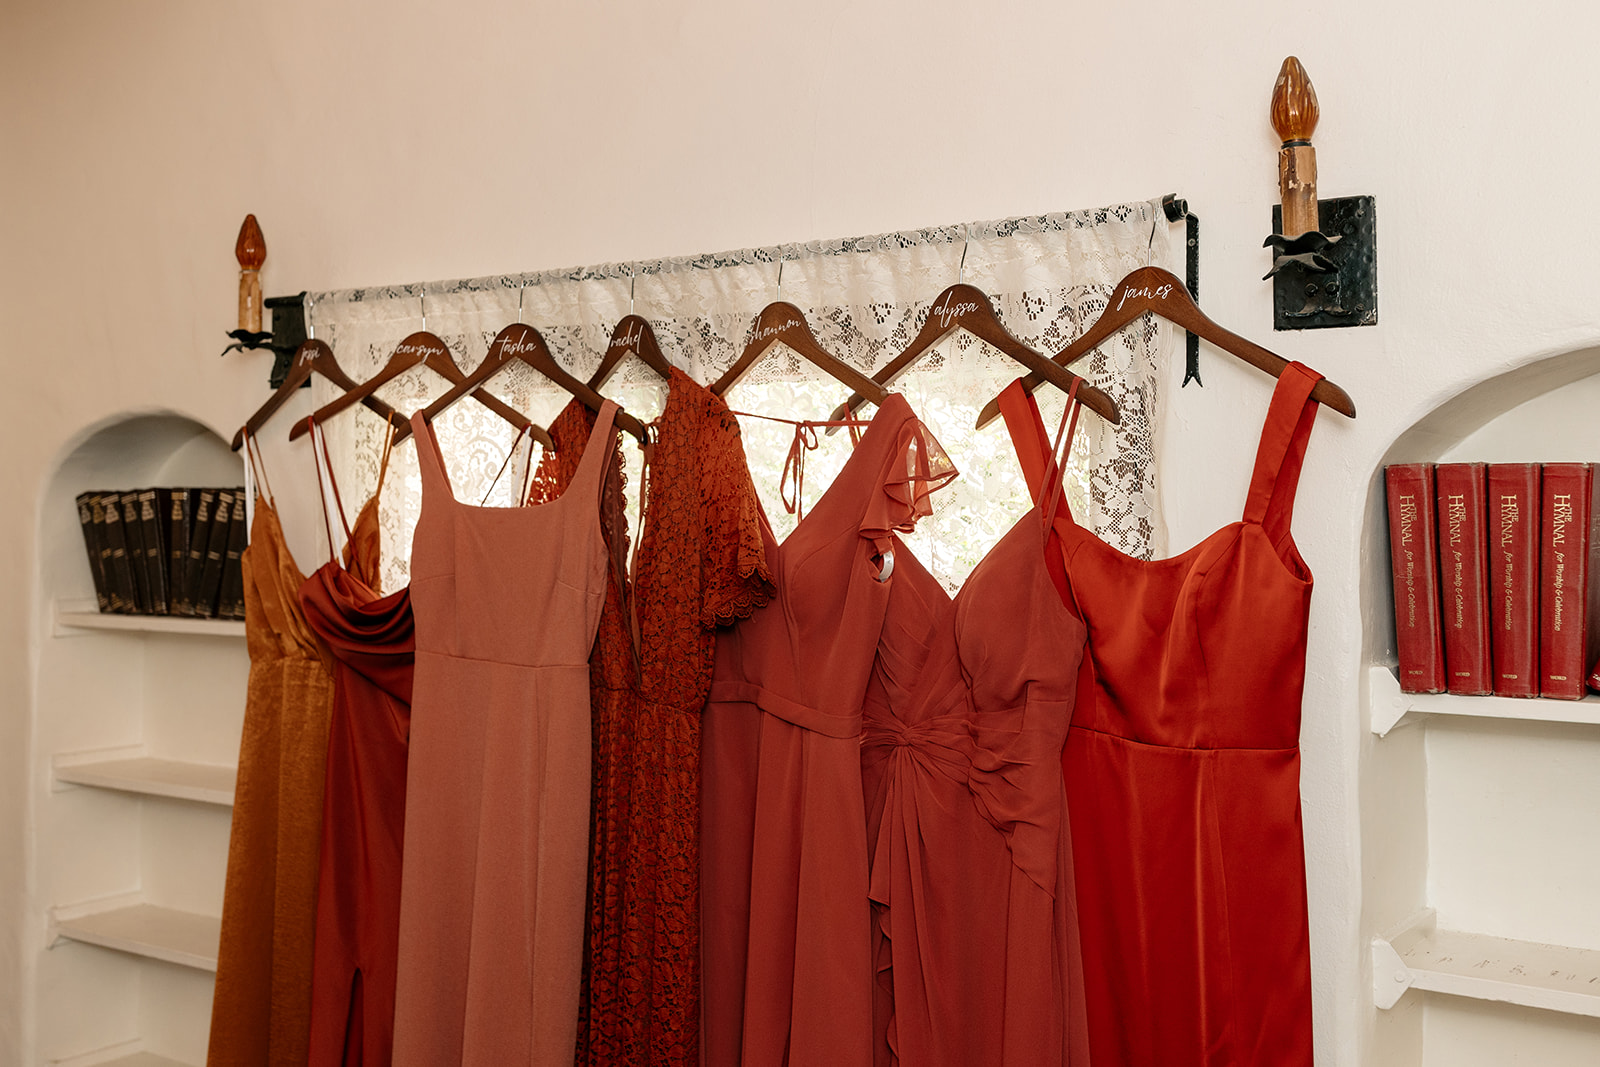 griffith house anaheim california socal orange county wedding red mismatched bridesmaid dresses getting ready pics